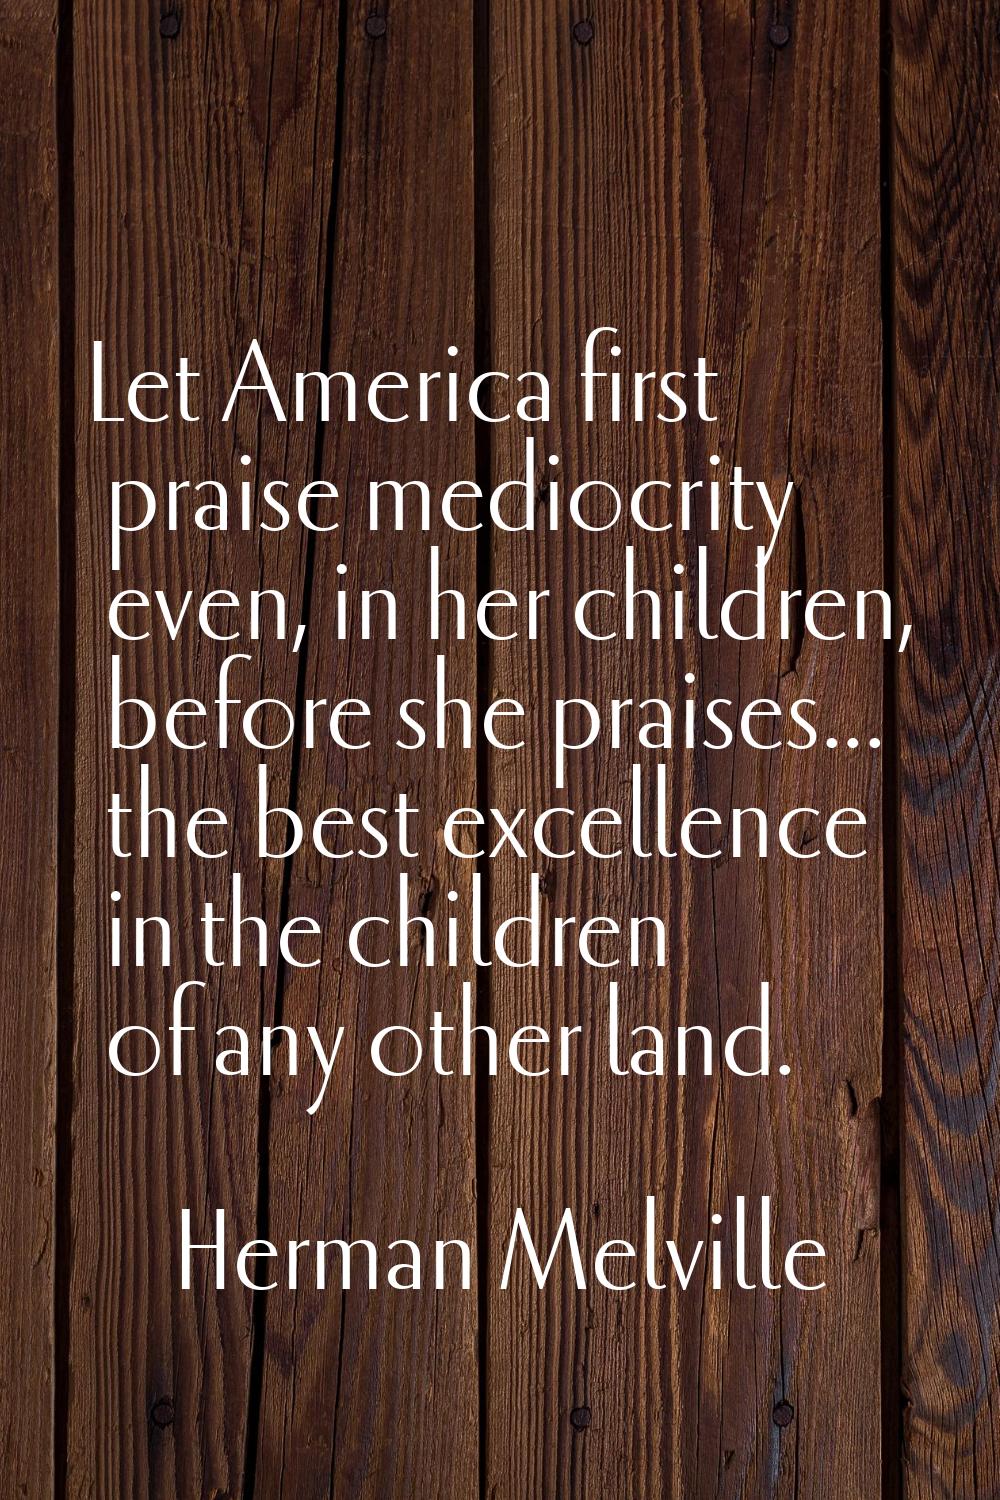 Let America first praise mediocrity even, in her children, before she praises... the best excellenc